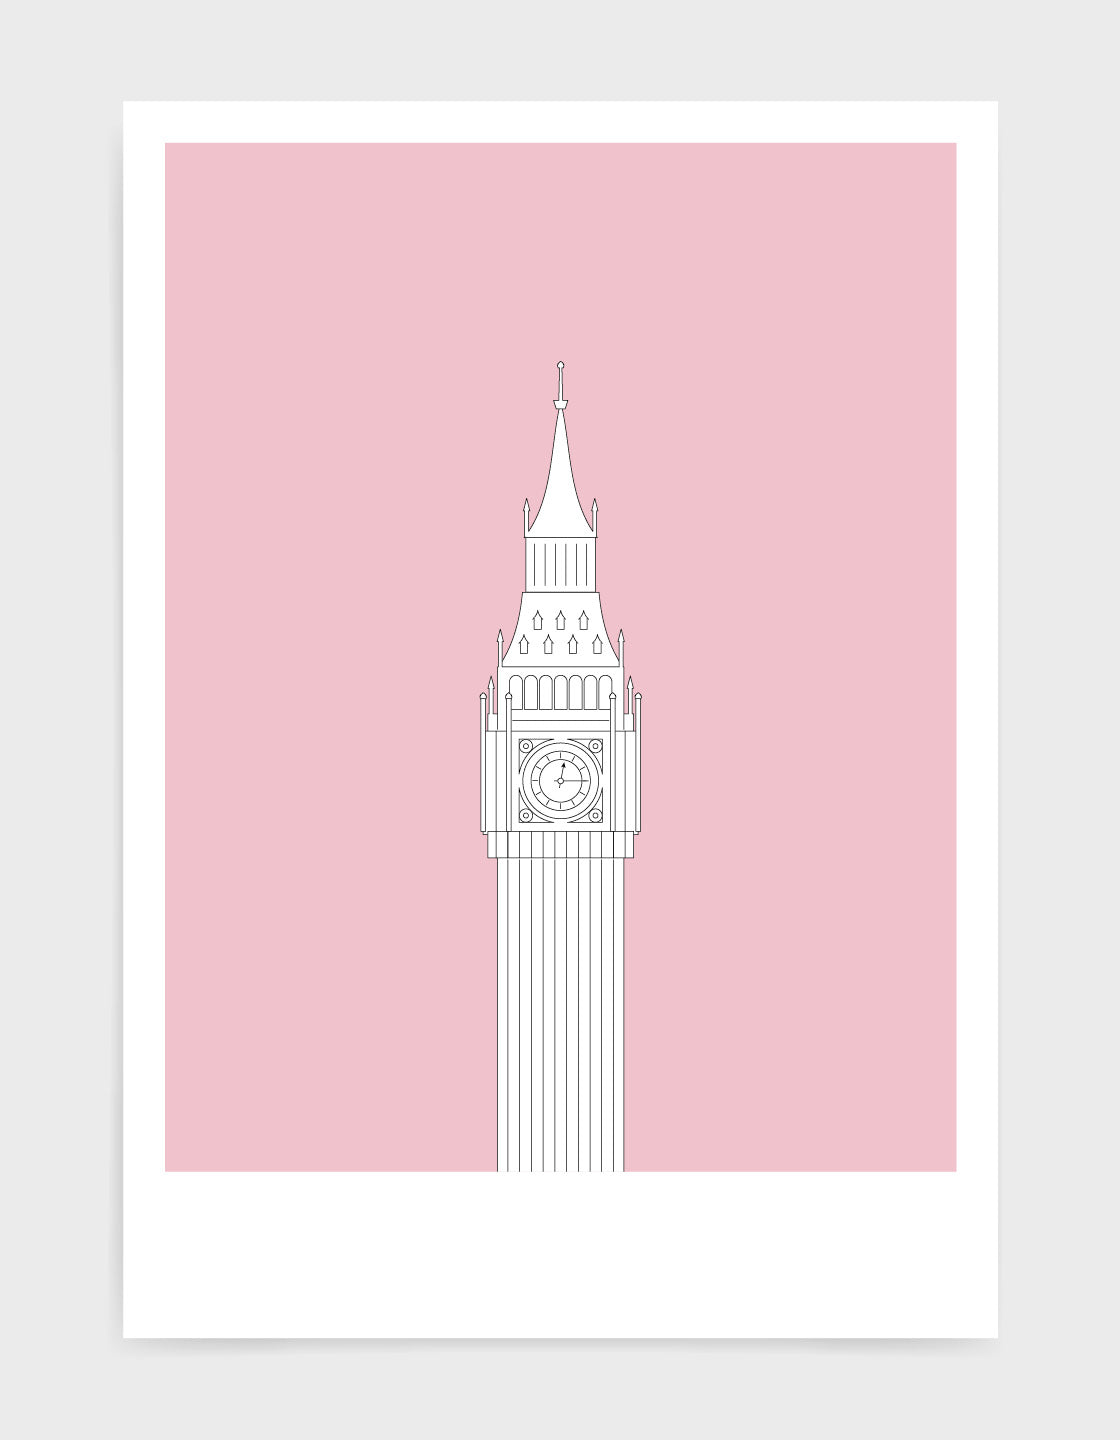 illustration of Big Ben in white against a dusty pink background